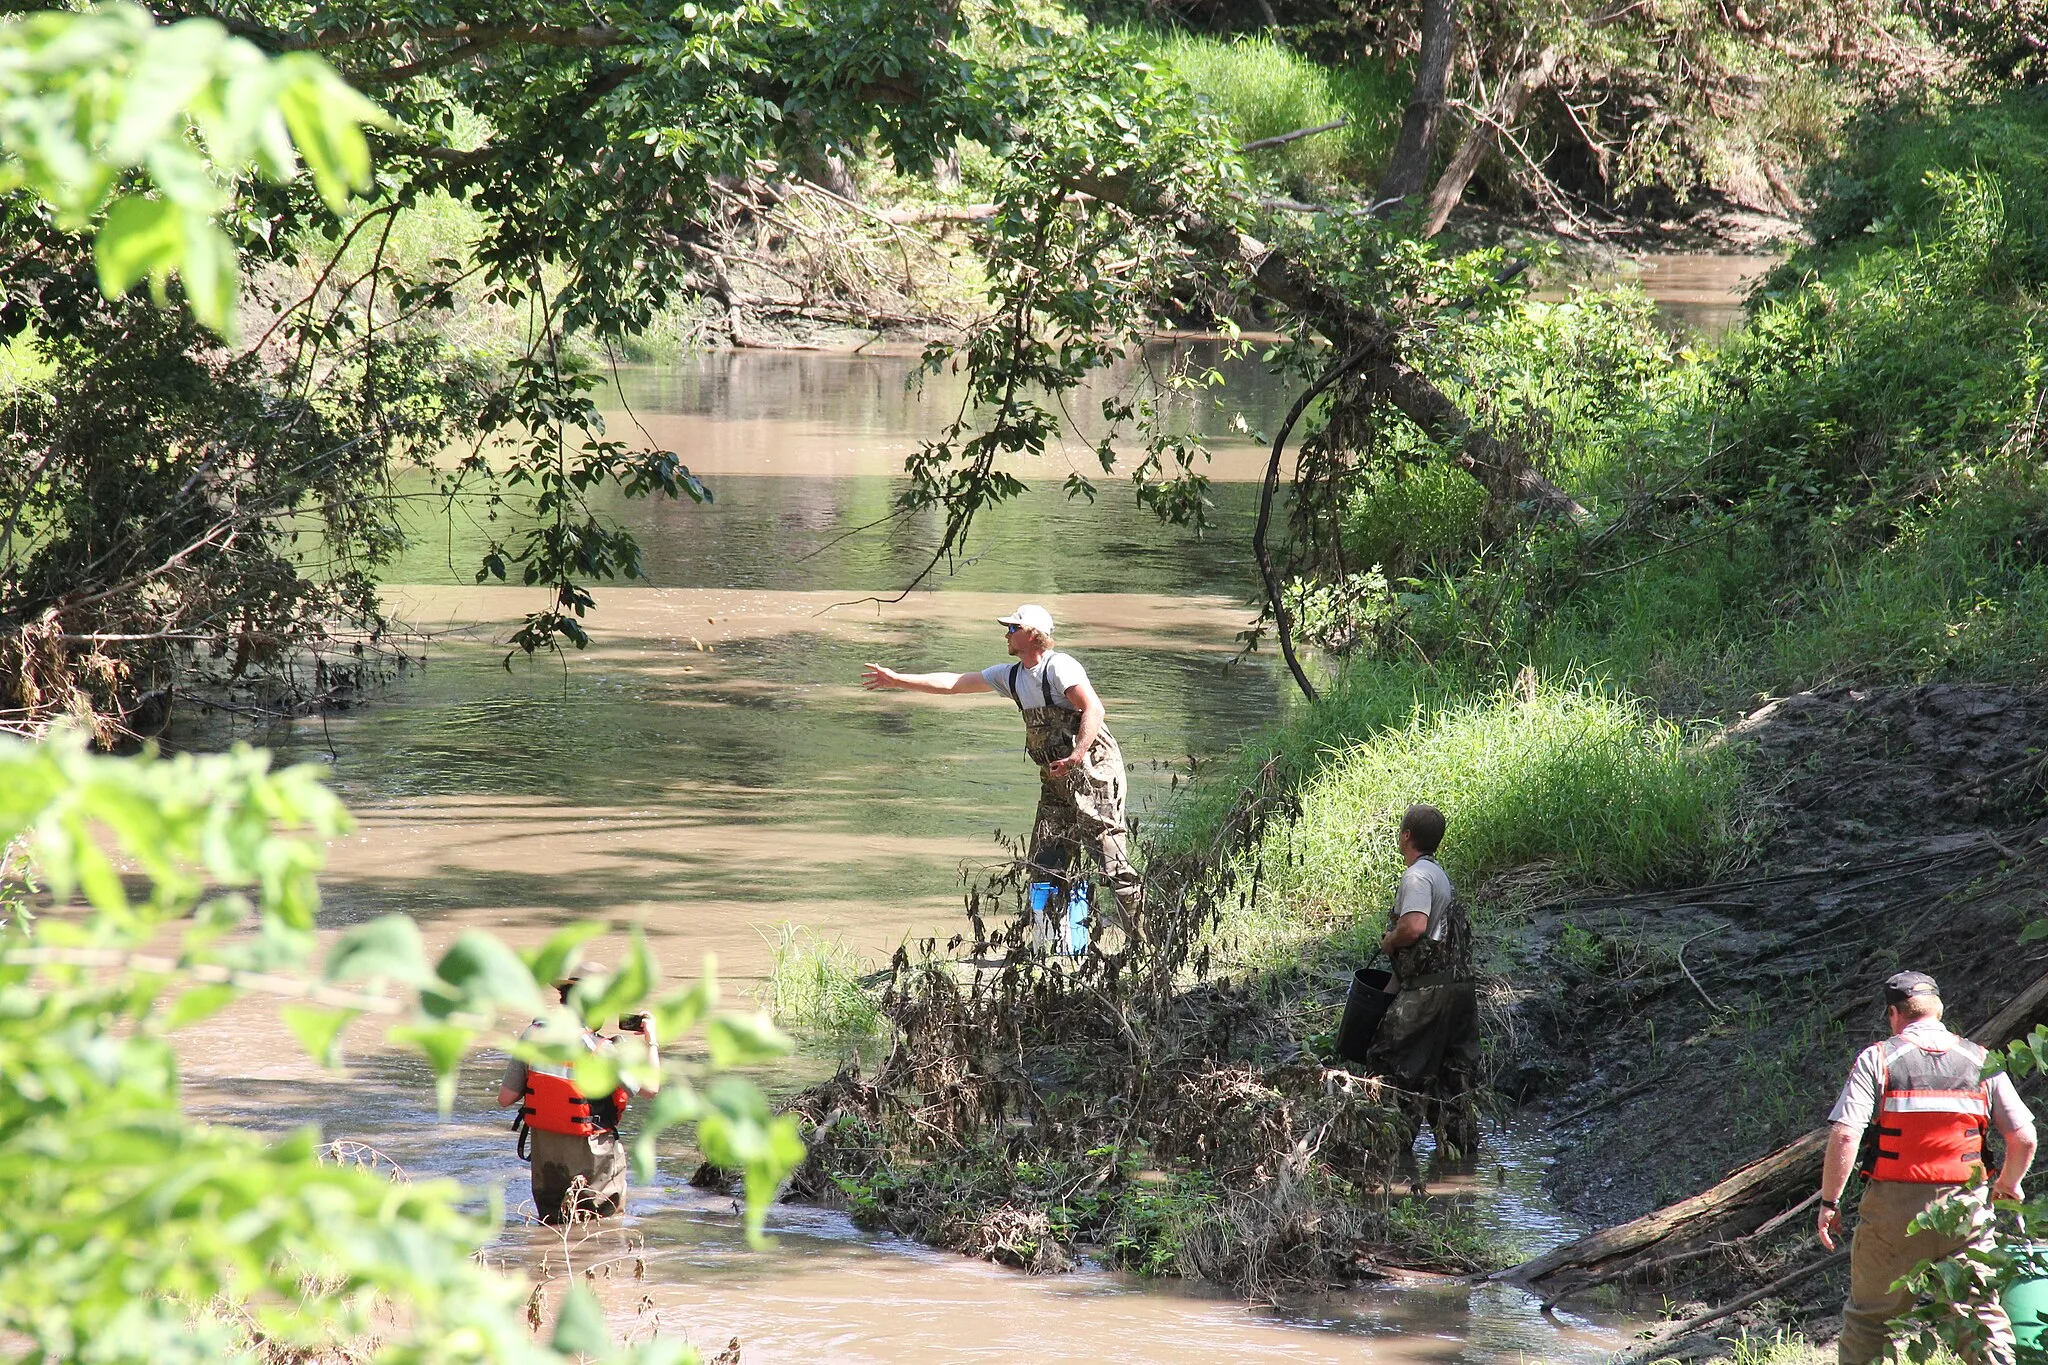 Photo showing: four NPS employees standing in Cub Creek, two are wearing gray shirts and green coveralls, two of them are wearing red life vests.
NPS employees standing in Cub Creek
Keywords: homestead national historical park; mussel